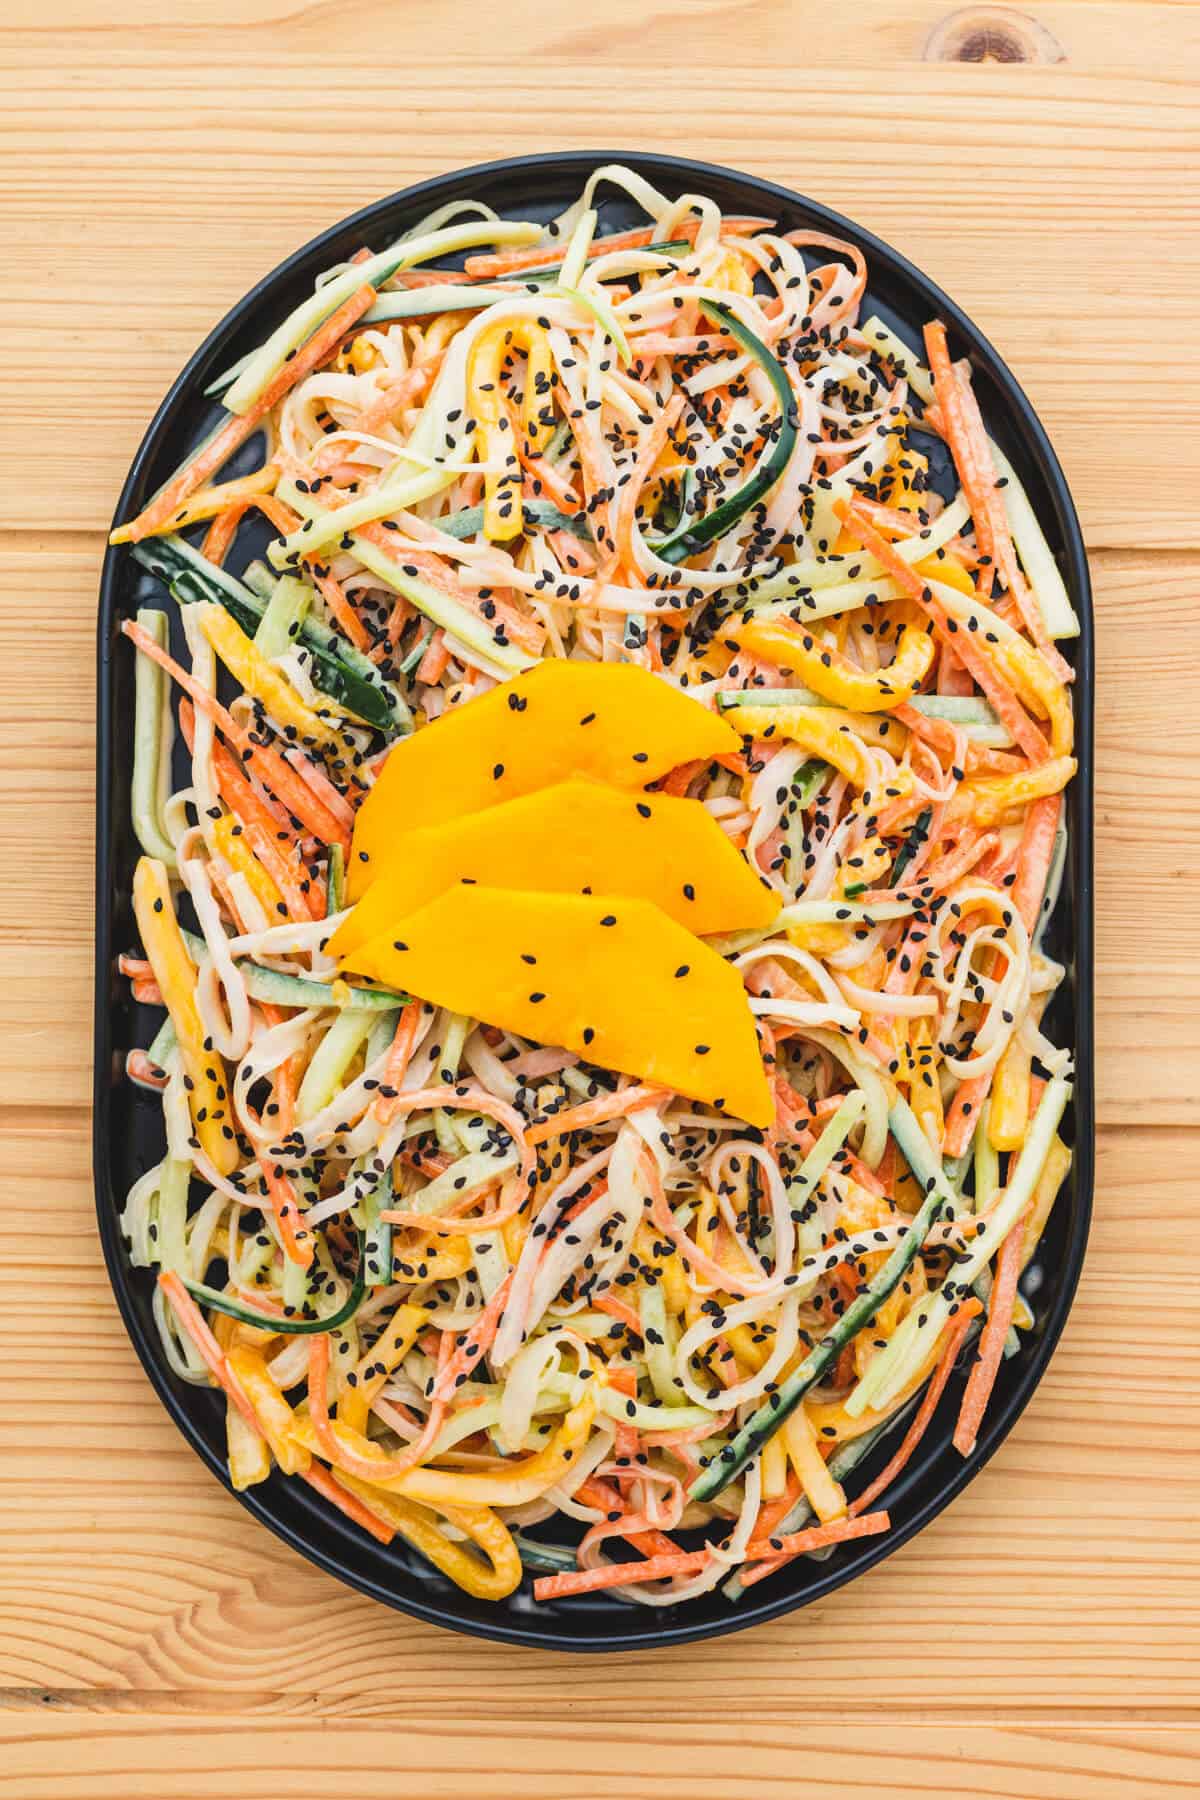 A plate topped with an imitation crab salad of carrots, cucumbers, mangoes and sesame seeds.